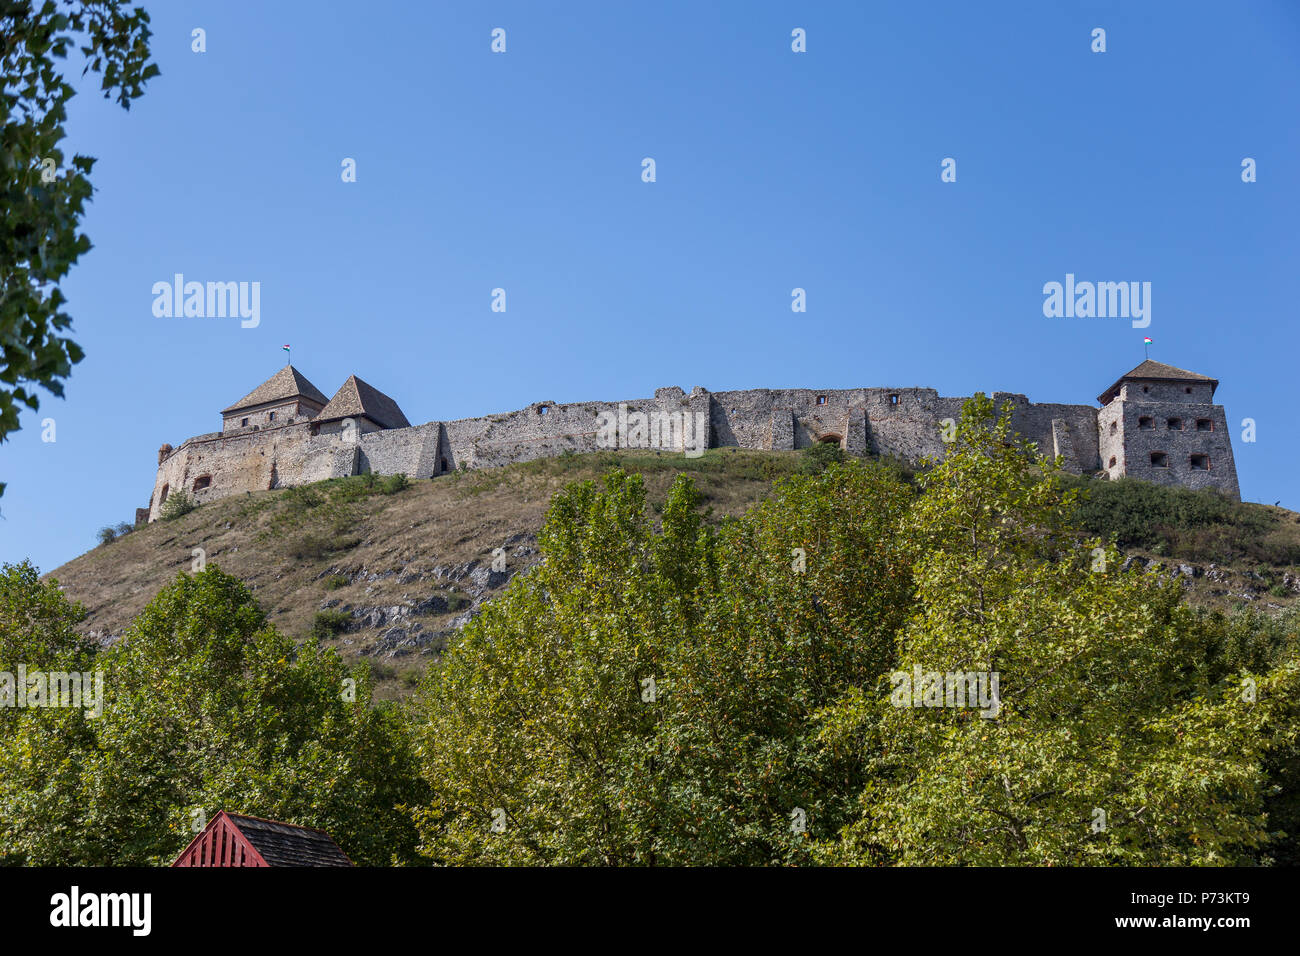 Ancient famous hungarian castle in small village Sumeg Stock Photo